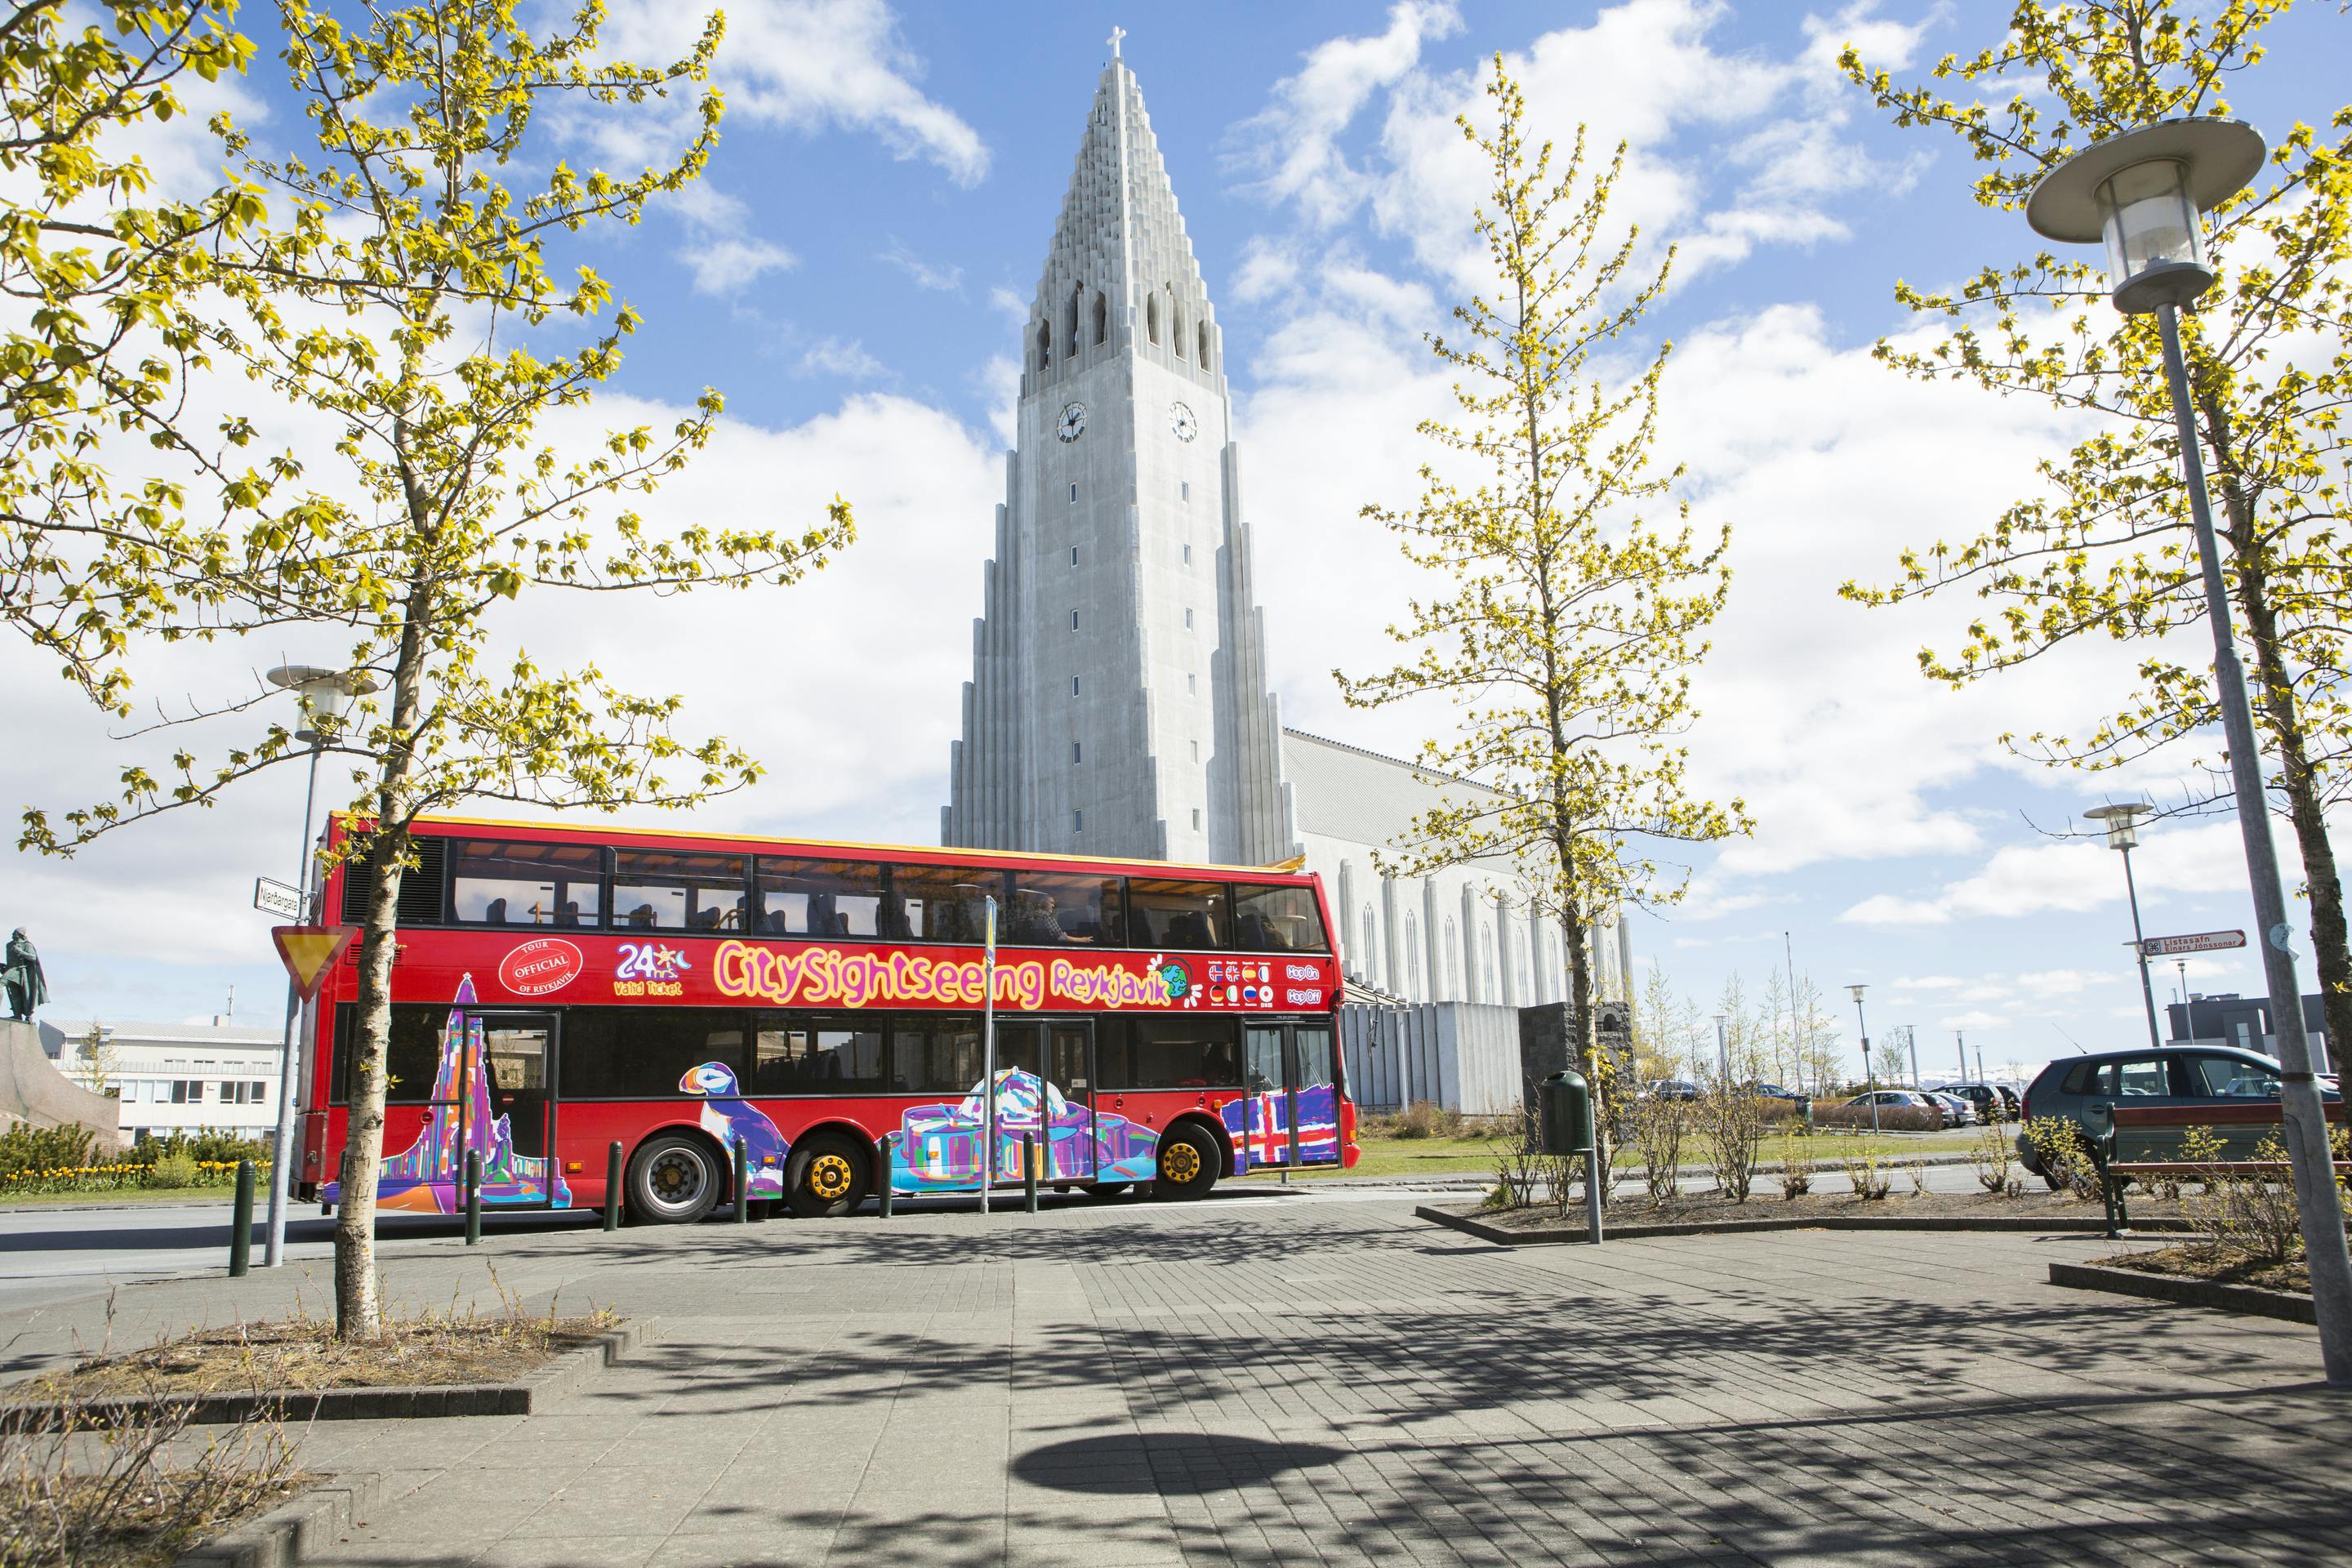 City Sightseeing hop-on hop-off bus tour of Musement